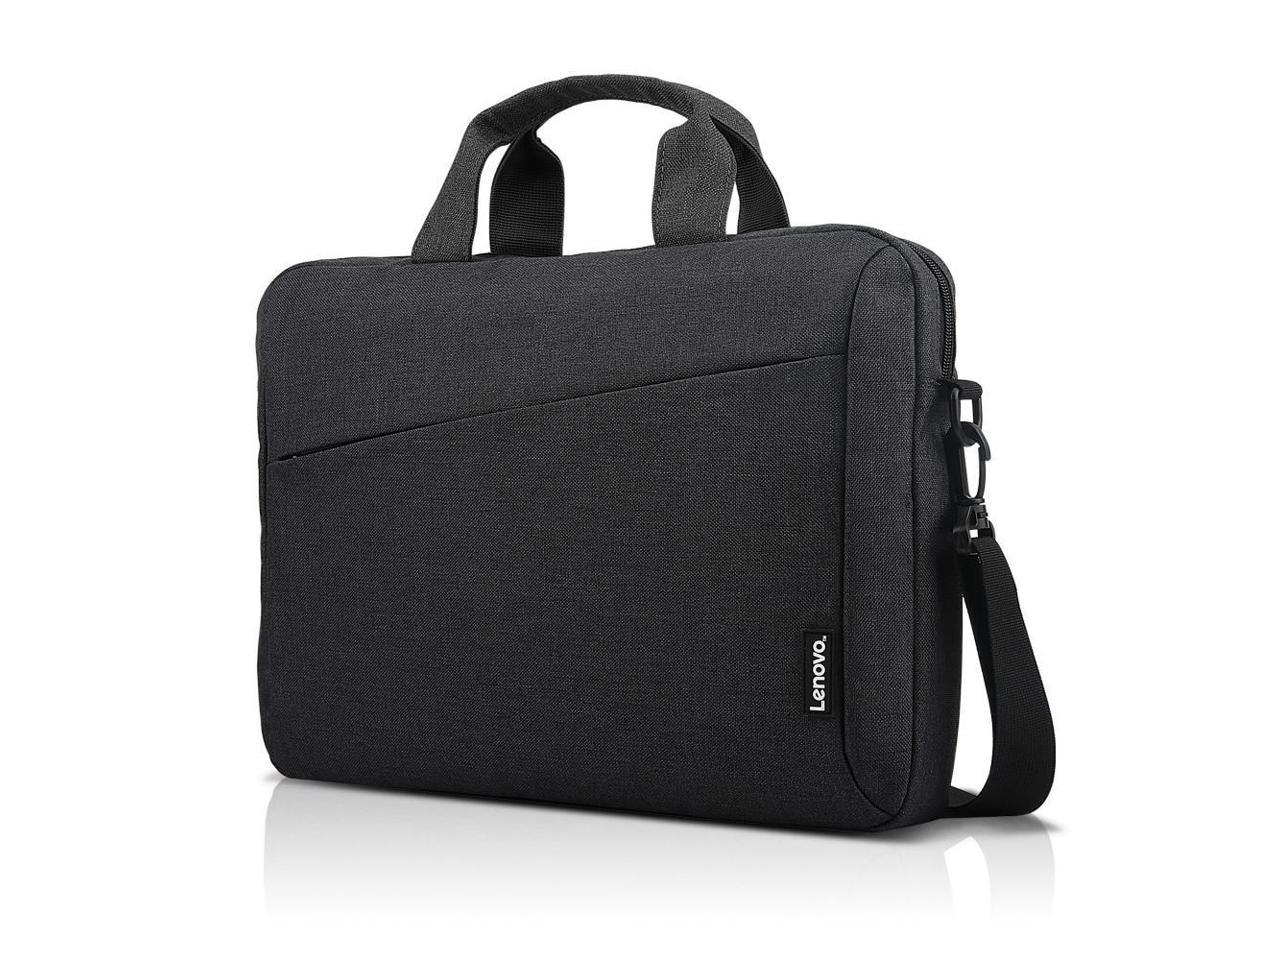 Lenovo T210 Carrying Case for 15.6" Notebook, Accessories, Books, Gear - Black